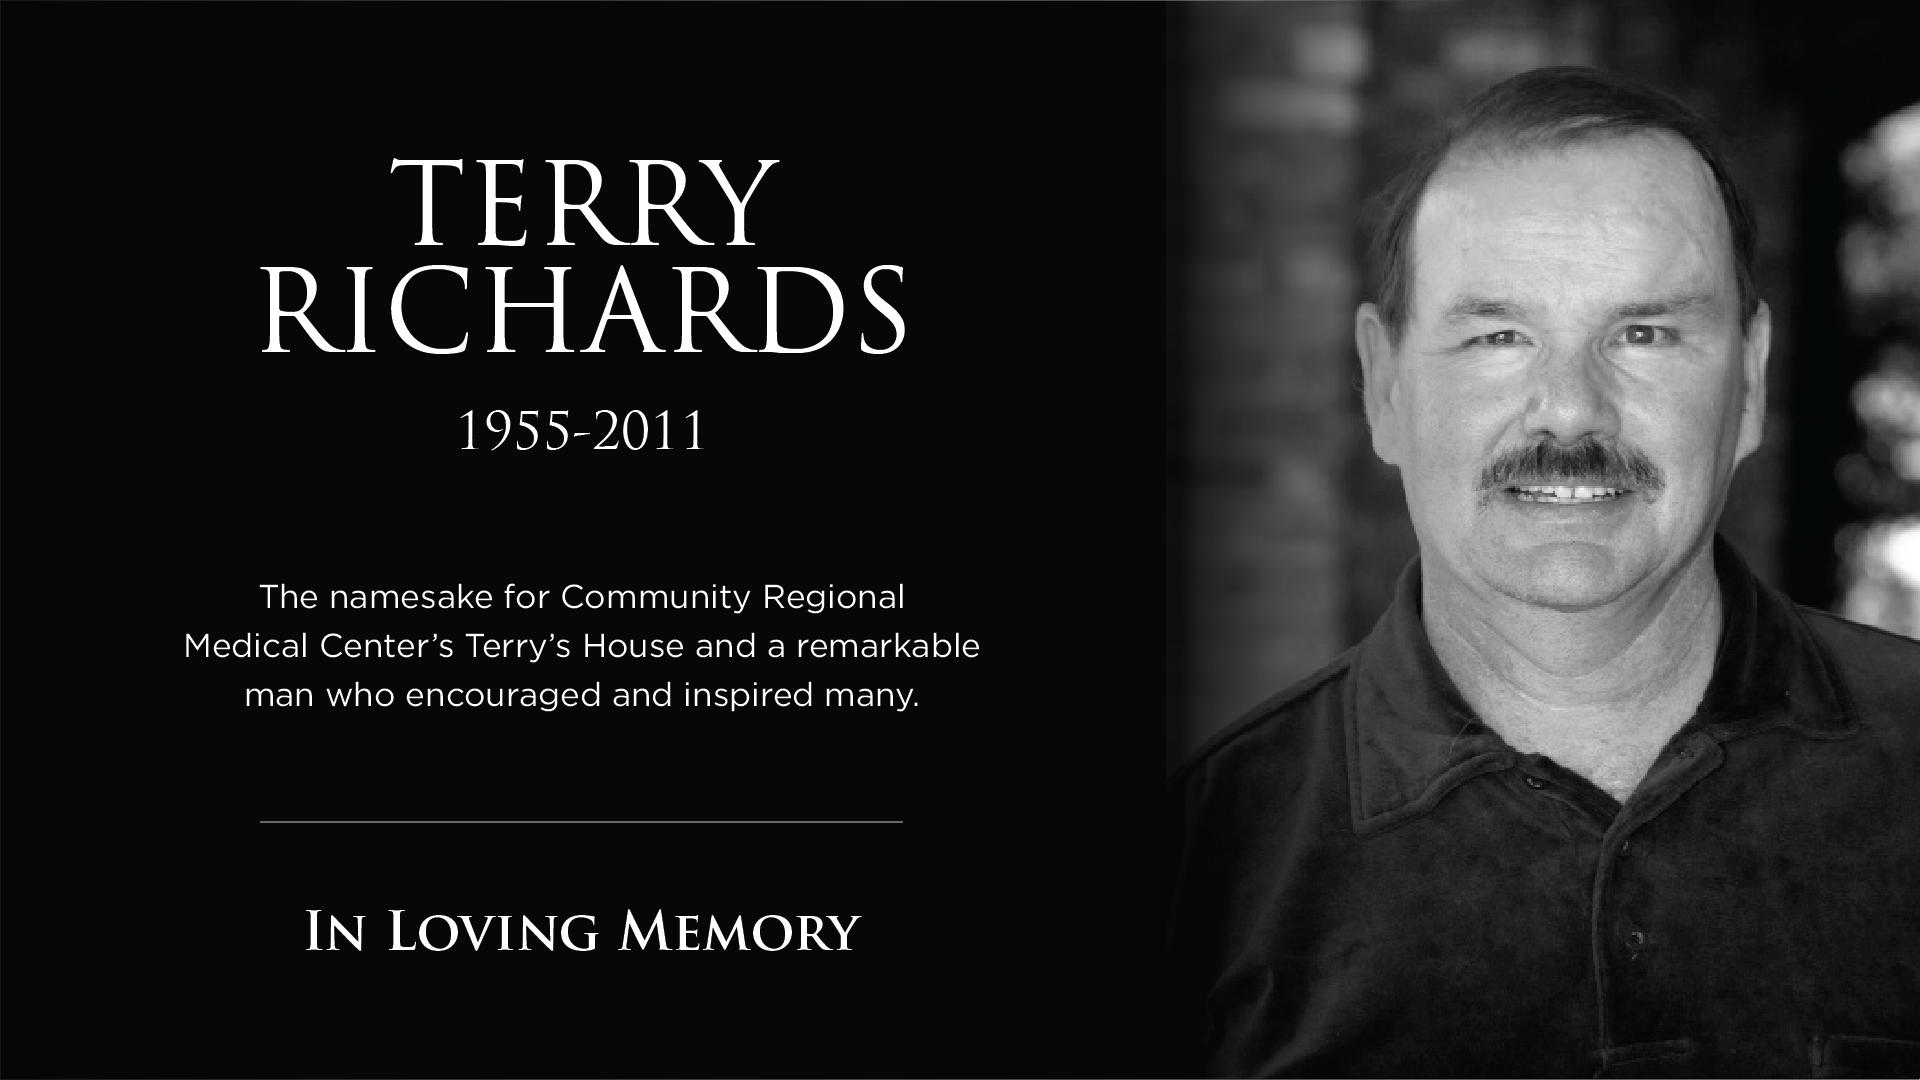 A memorial photo of Terry Richards